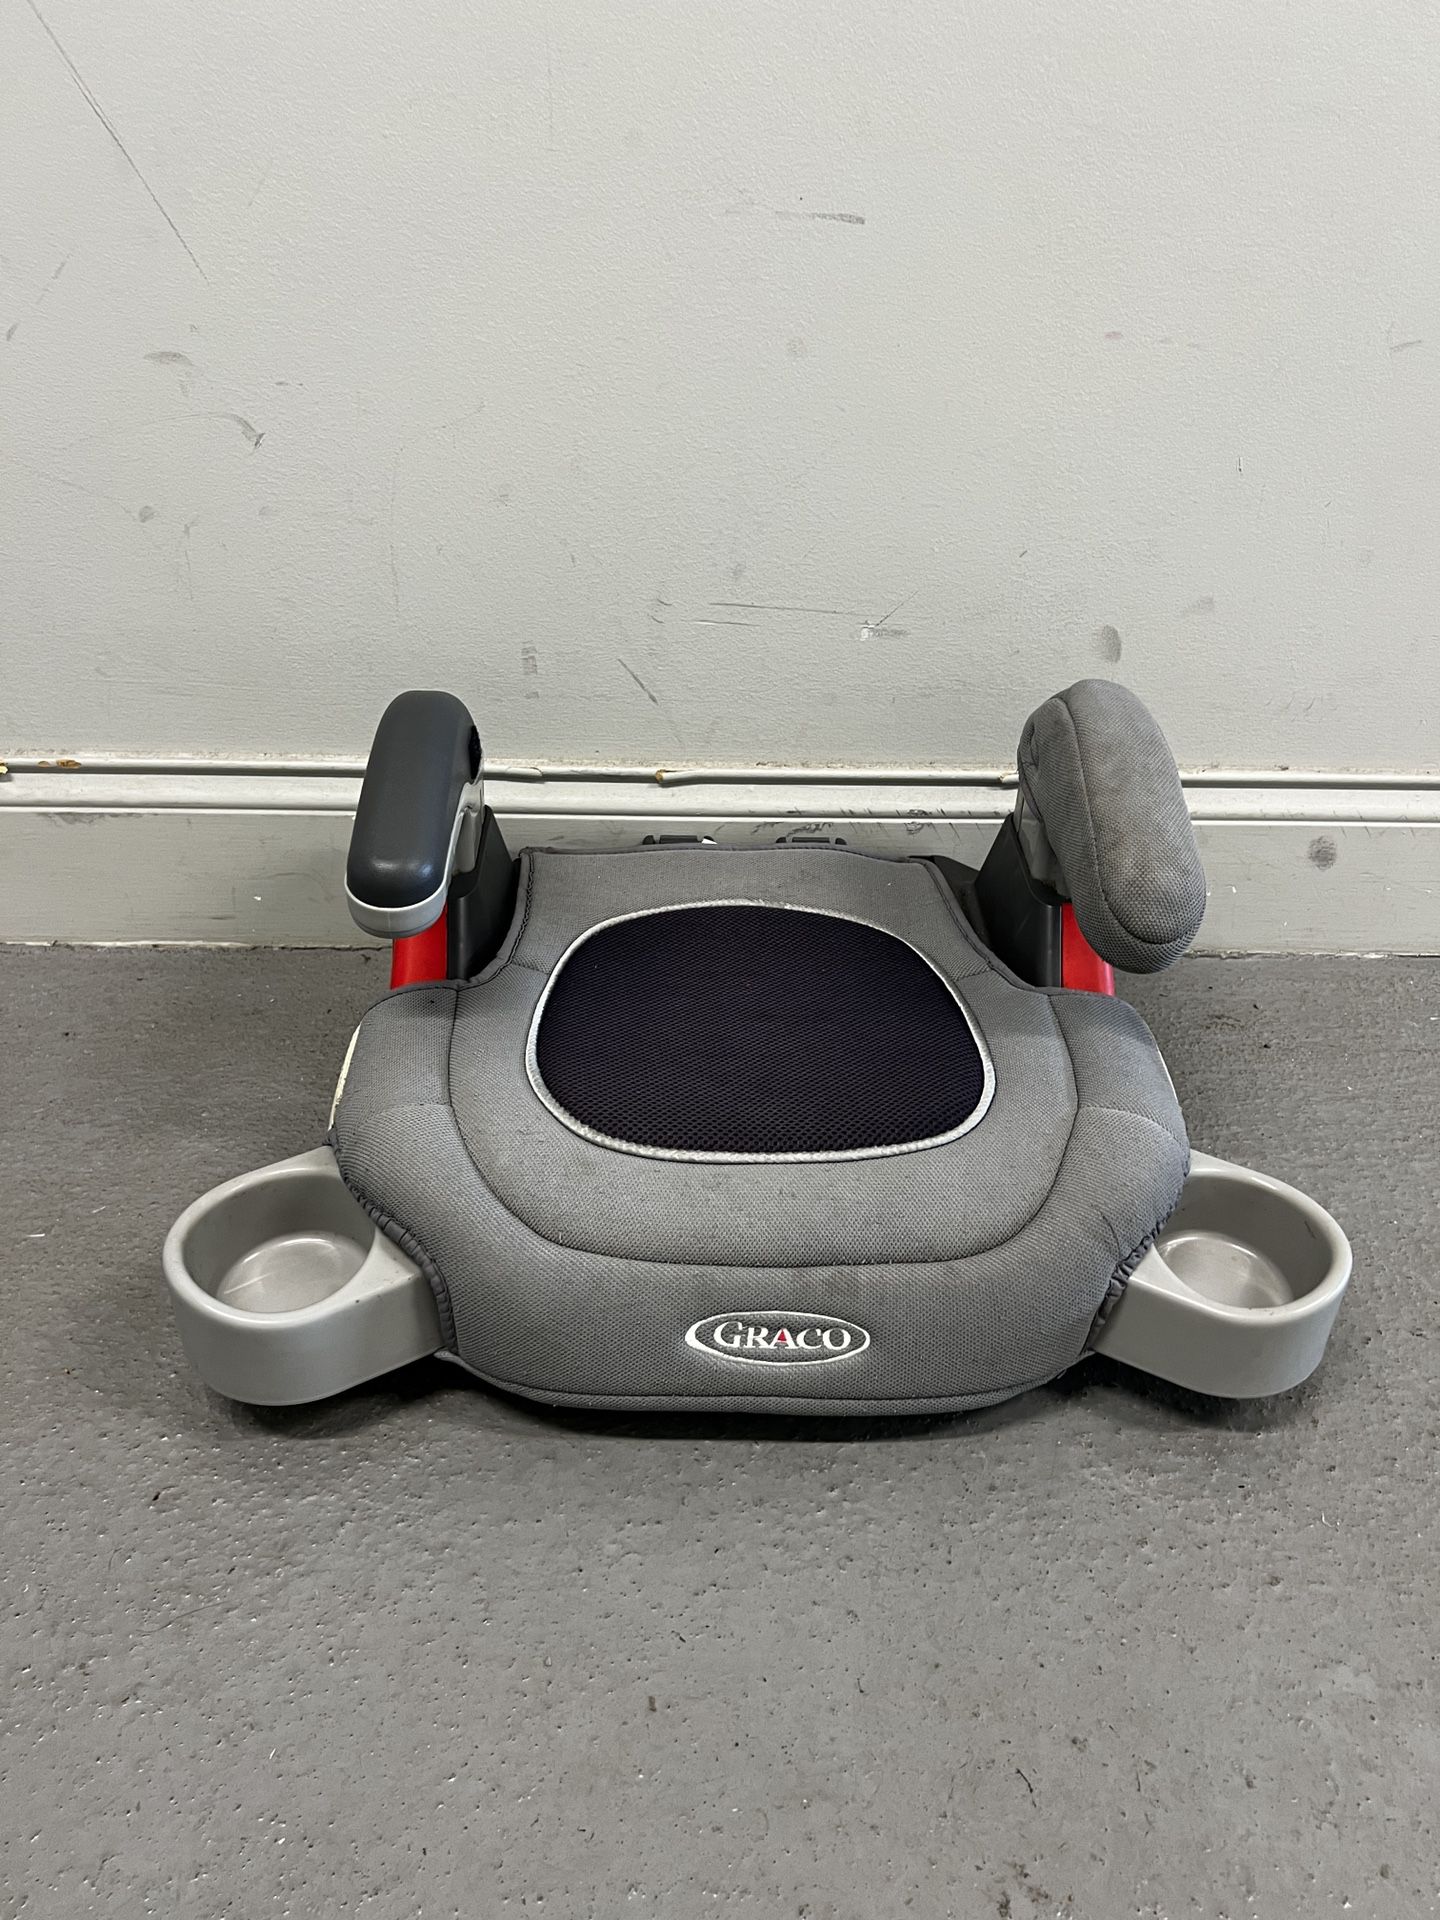 GRACO Booster Car Seat Light Grey (Good condition) PICK UP IN CORNELIUS 